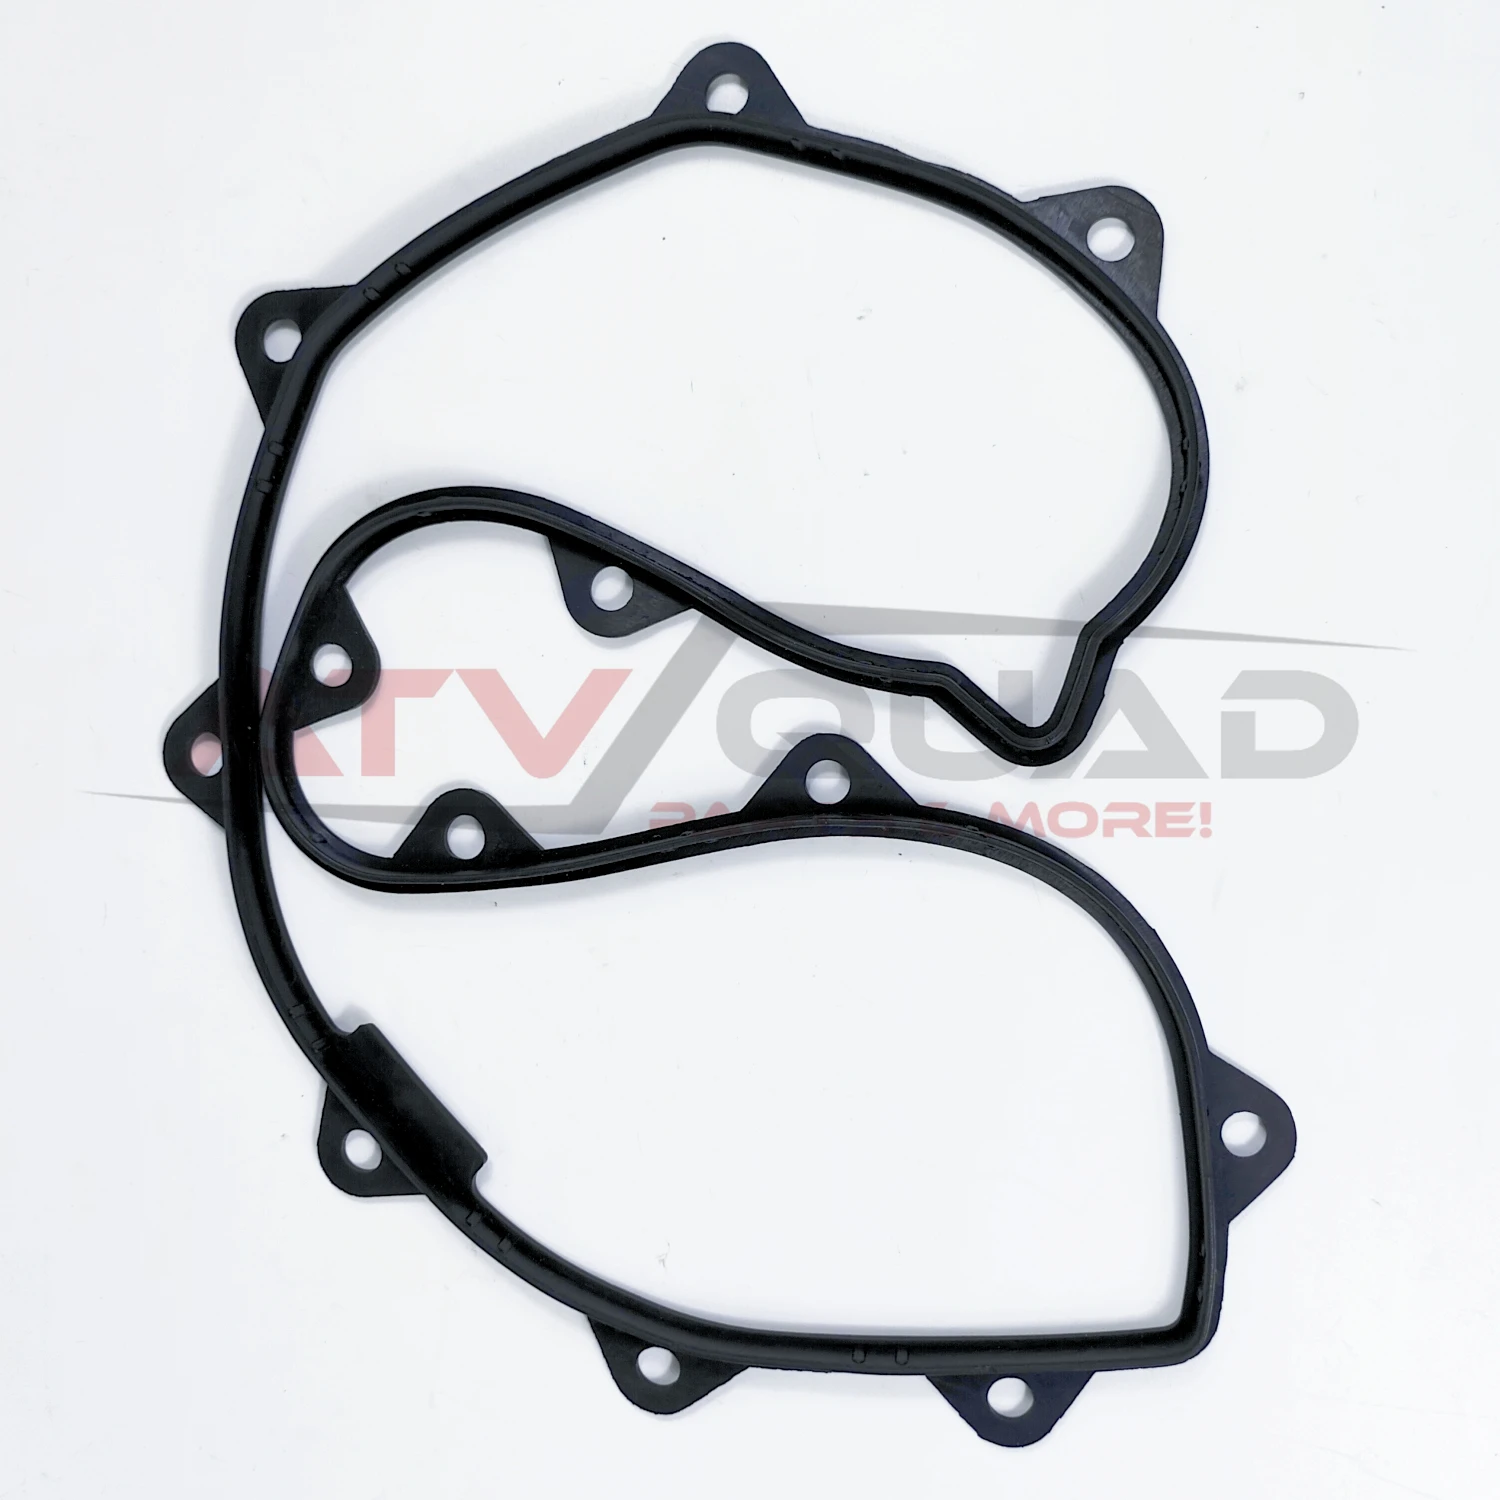 Clutch Cover Gasket for Can-Am Outlander 500 650 800 800R Renegade 500 800 800R 420430120 420430123 420430124